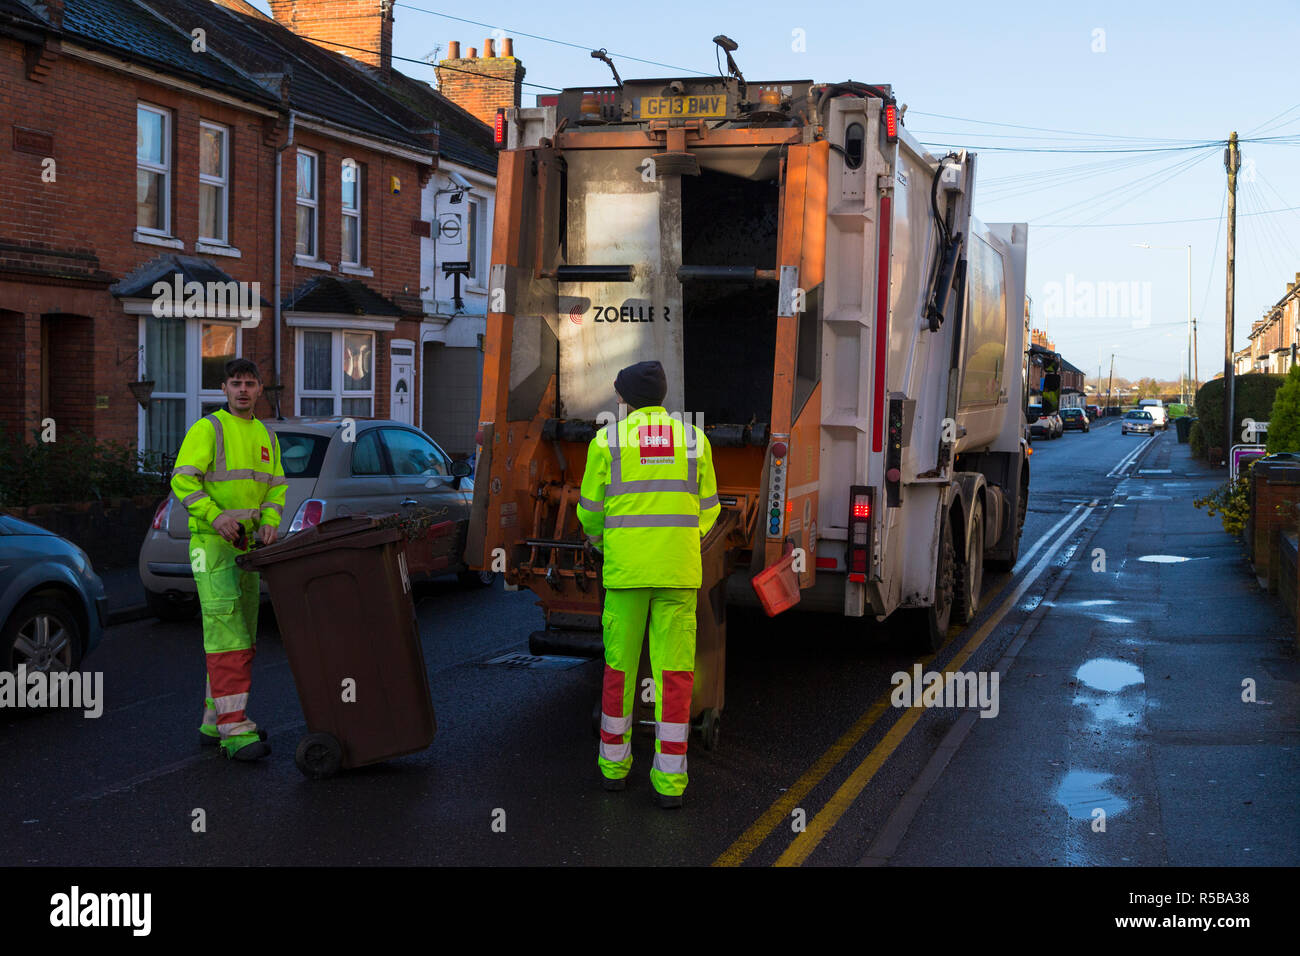 Men wearing biffa jackets collecting household rubbish bins and emptying into dustcart, rubbish collection by council workers Stock Photo